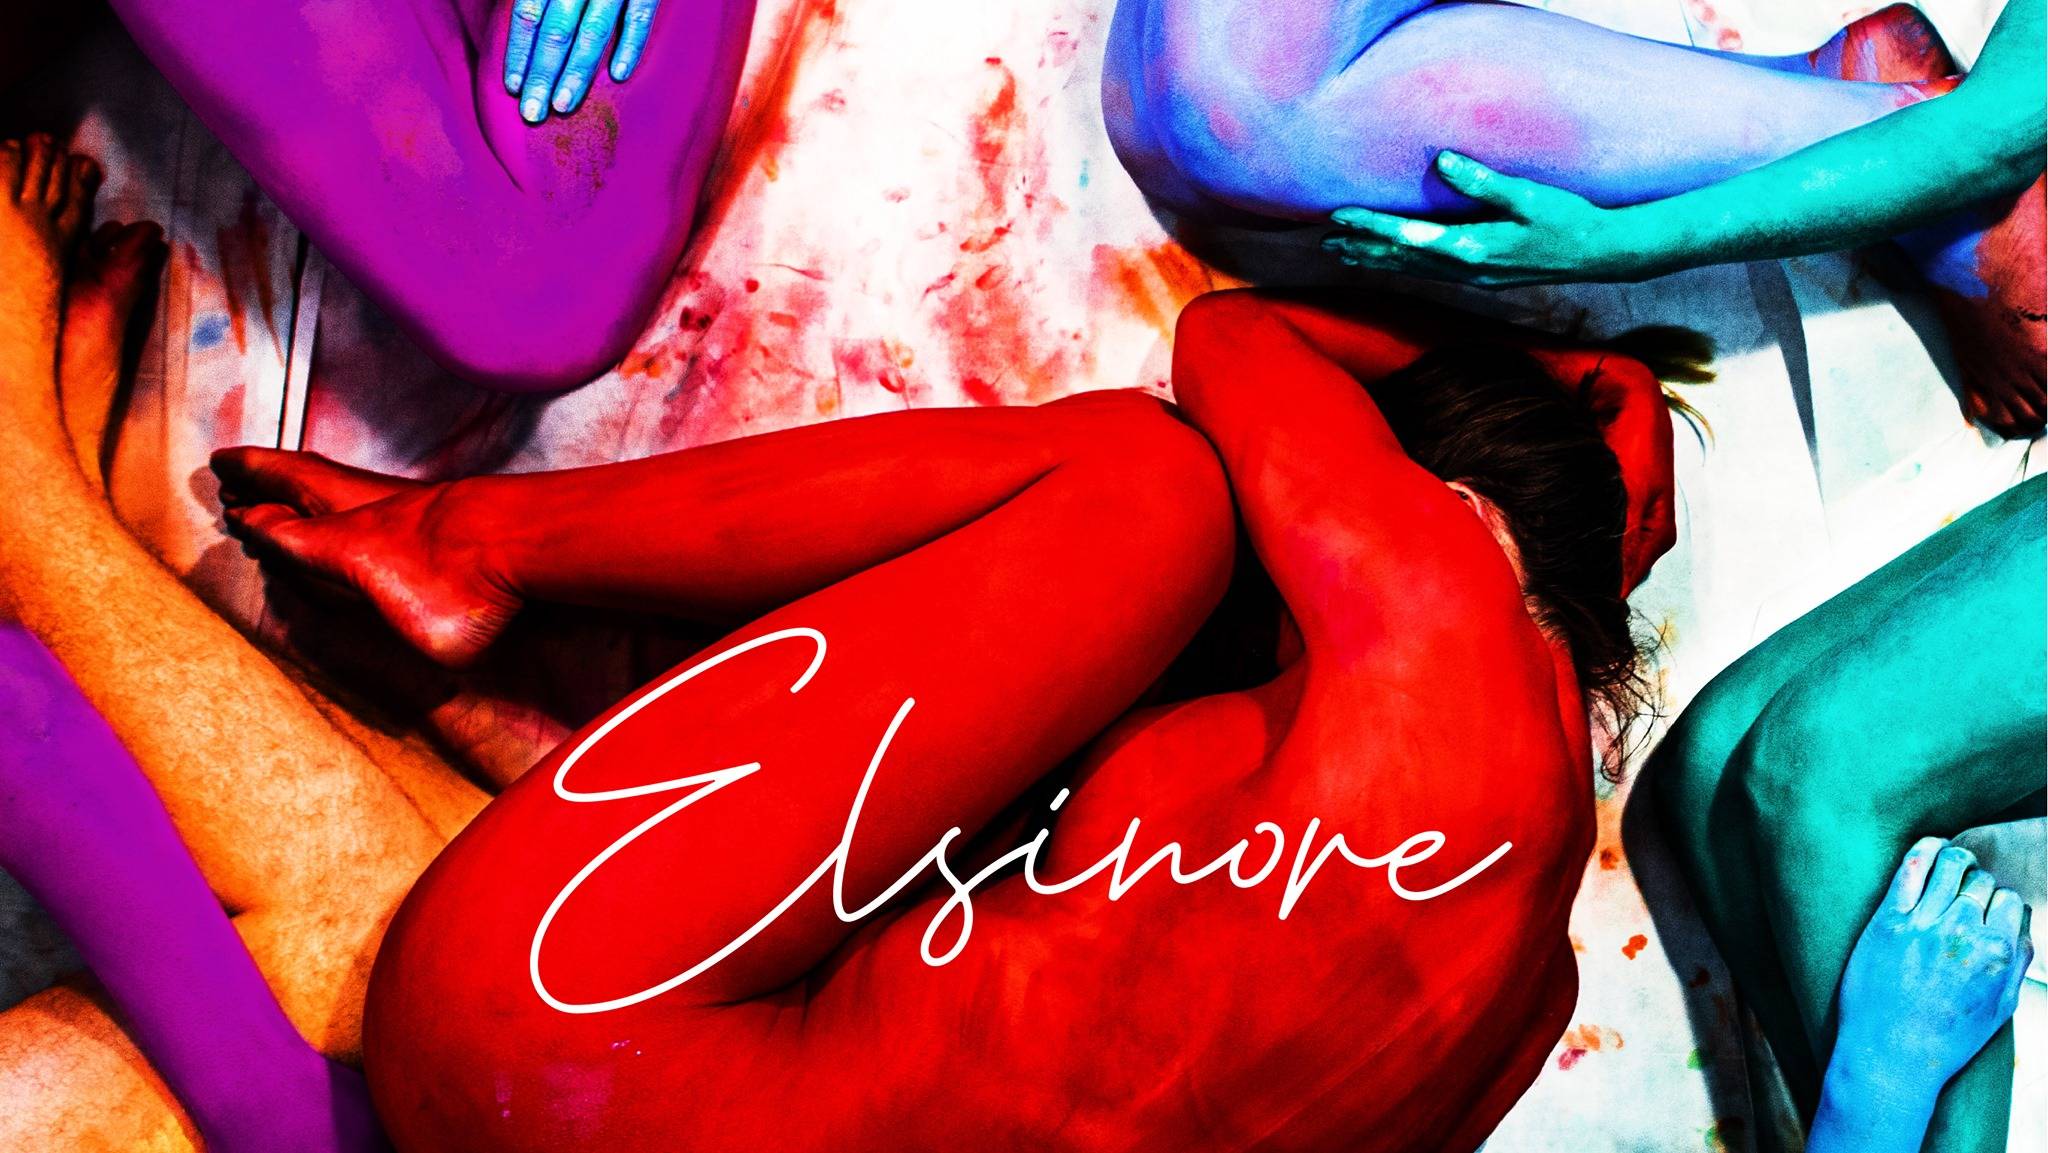 Elsinore drops new video for “Turn It On”